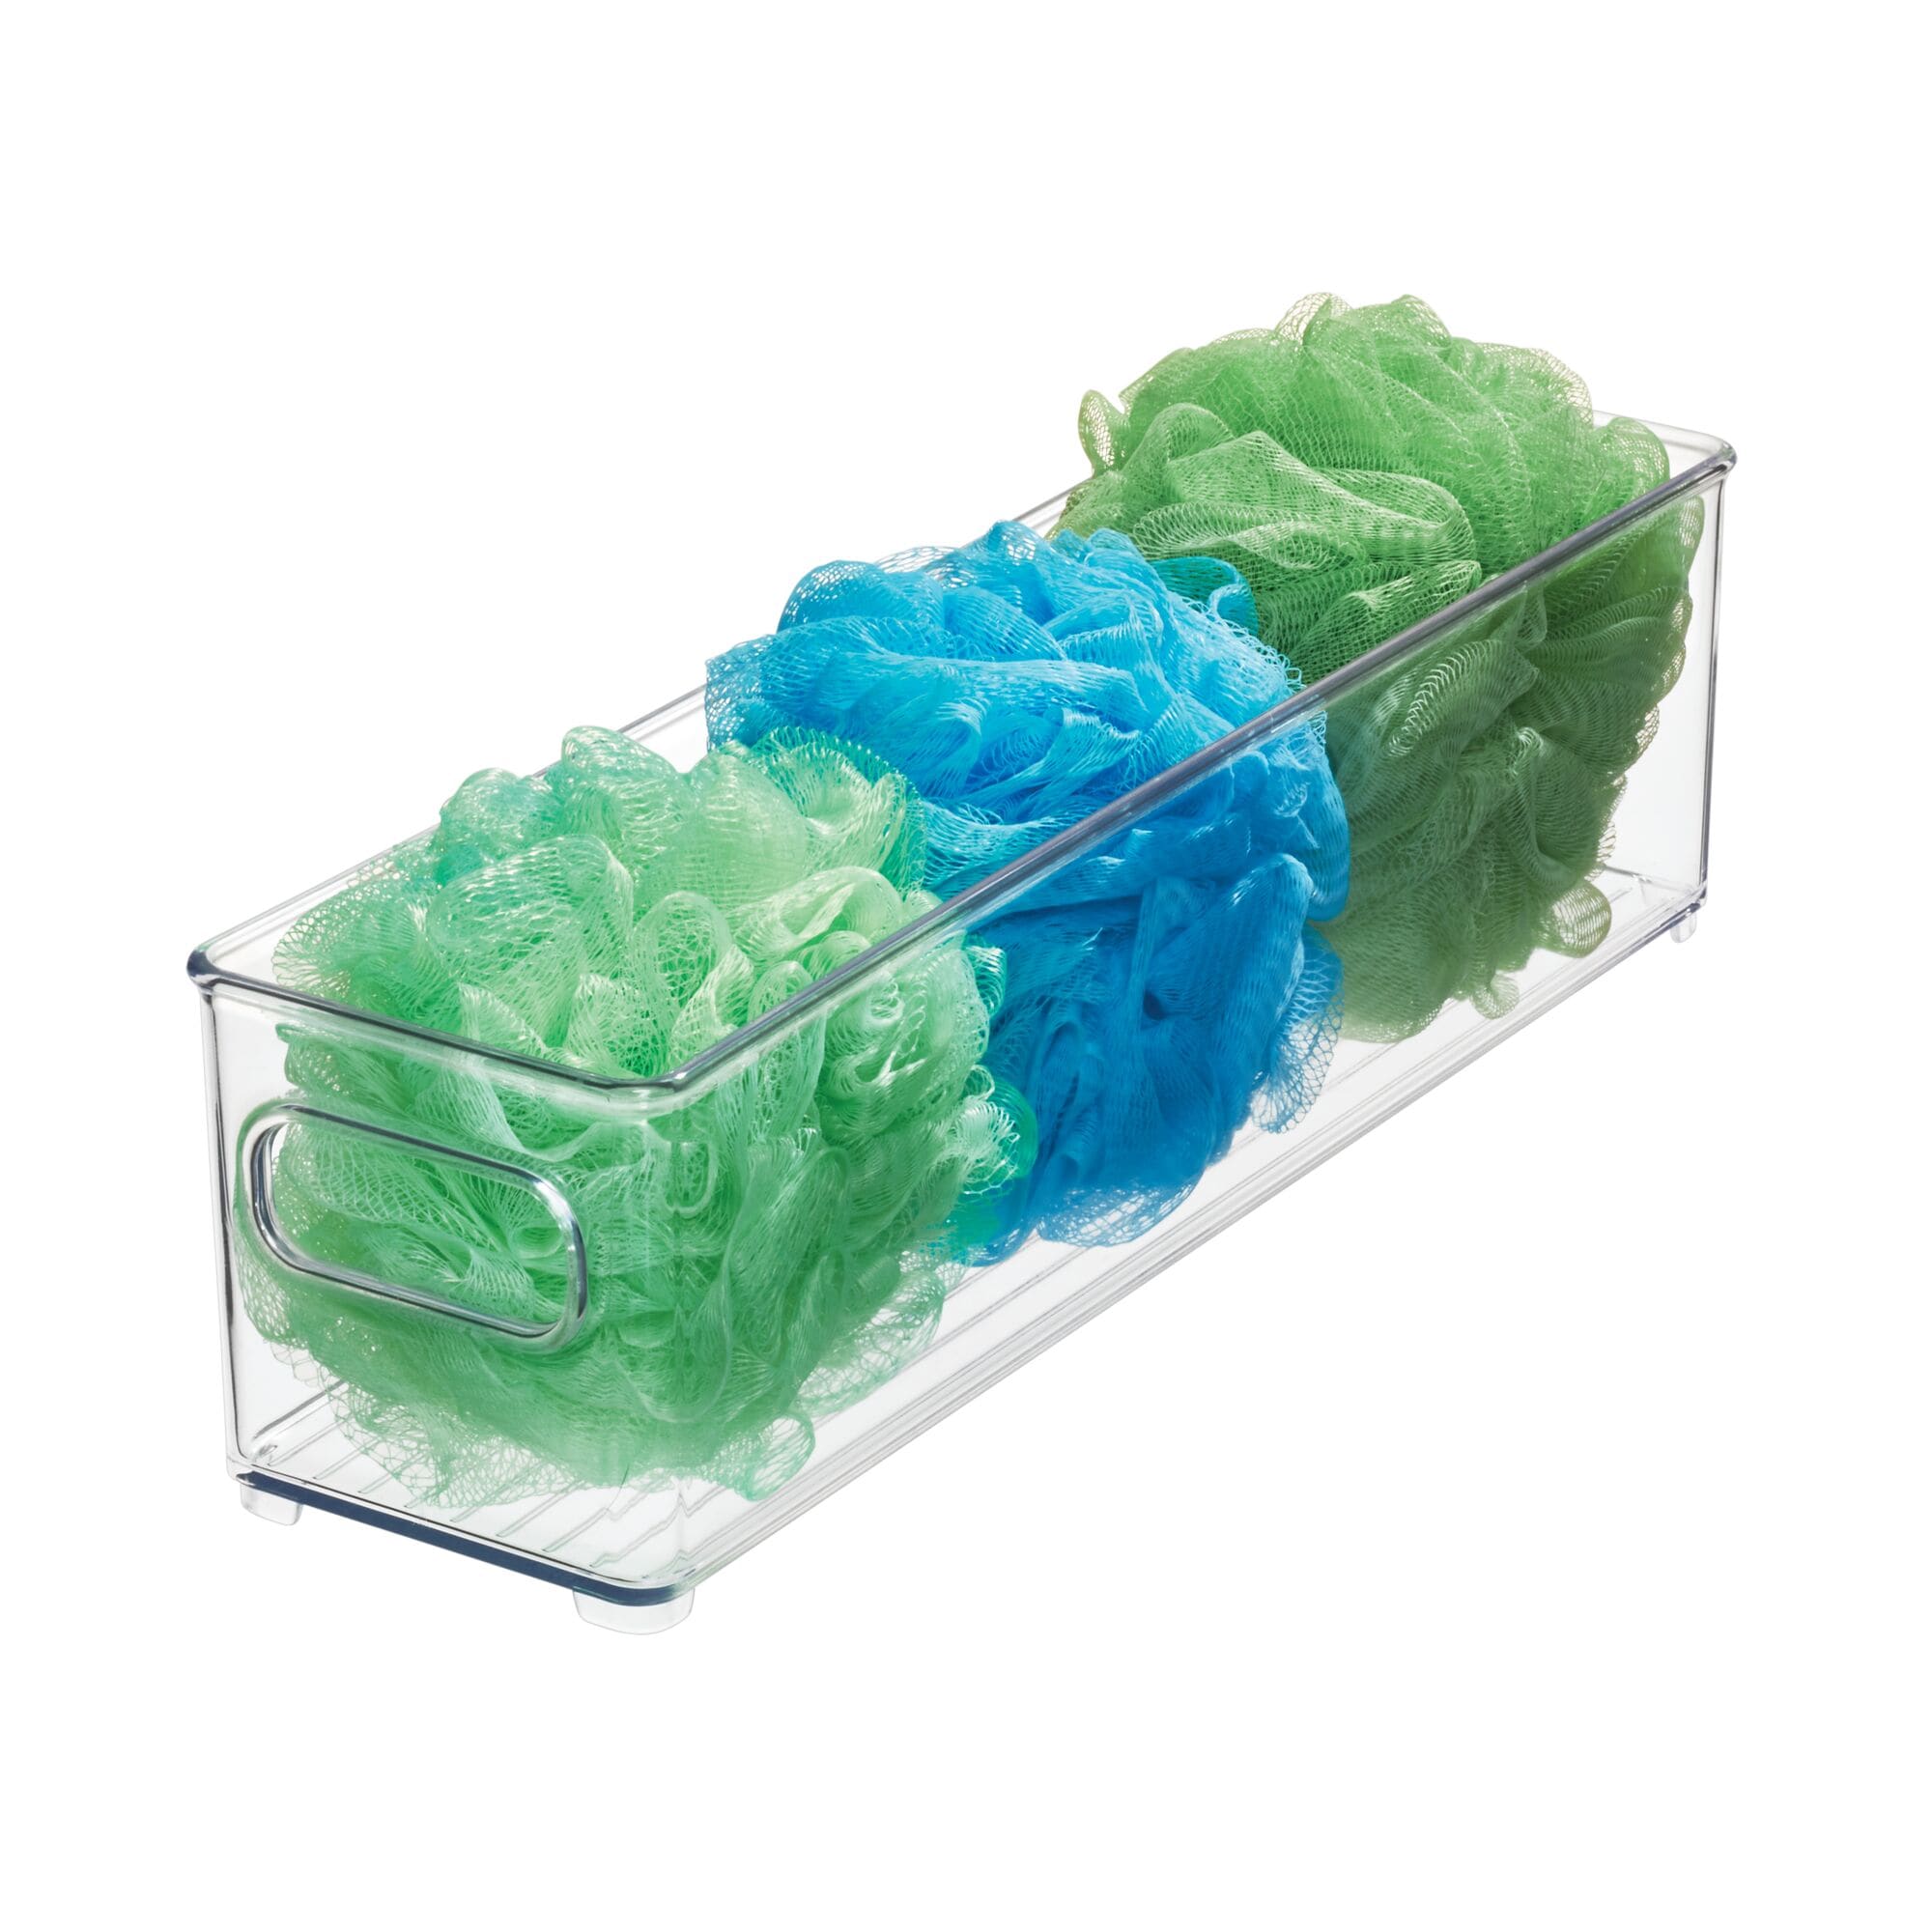 2 under sink organizers, $9+, 4 Stackable organizers w/ ice cube tray, $8+, 36 food storage containers, $34+